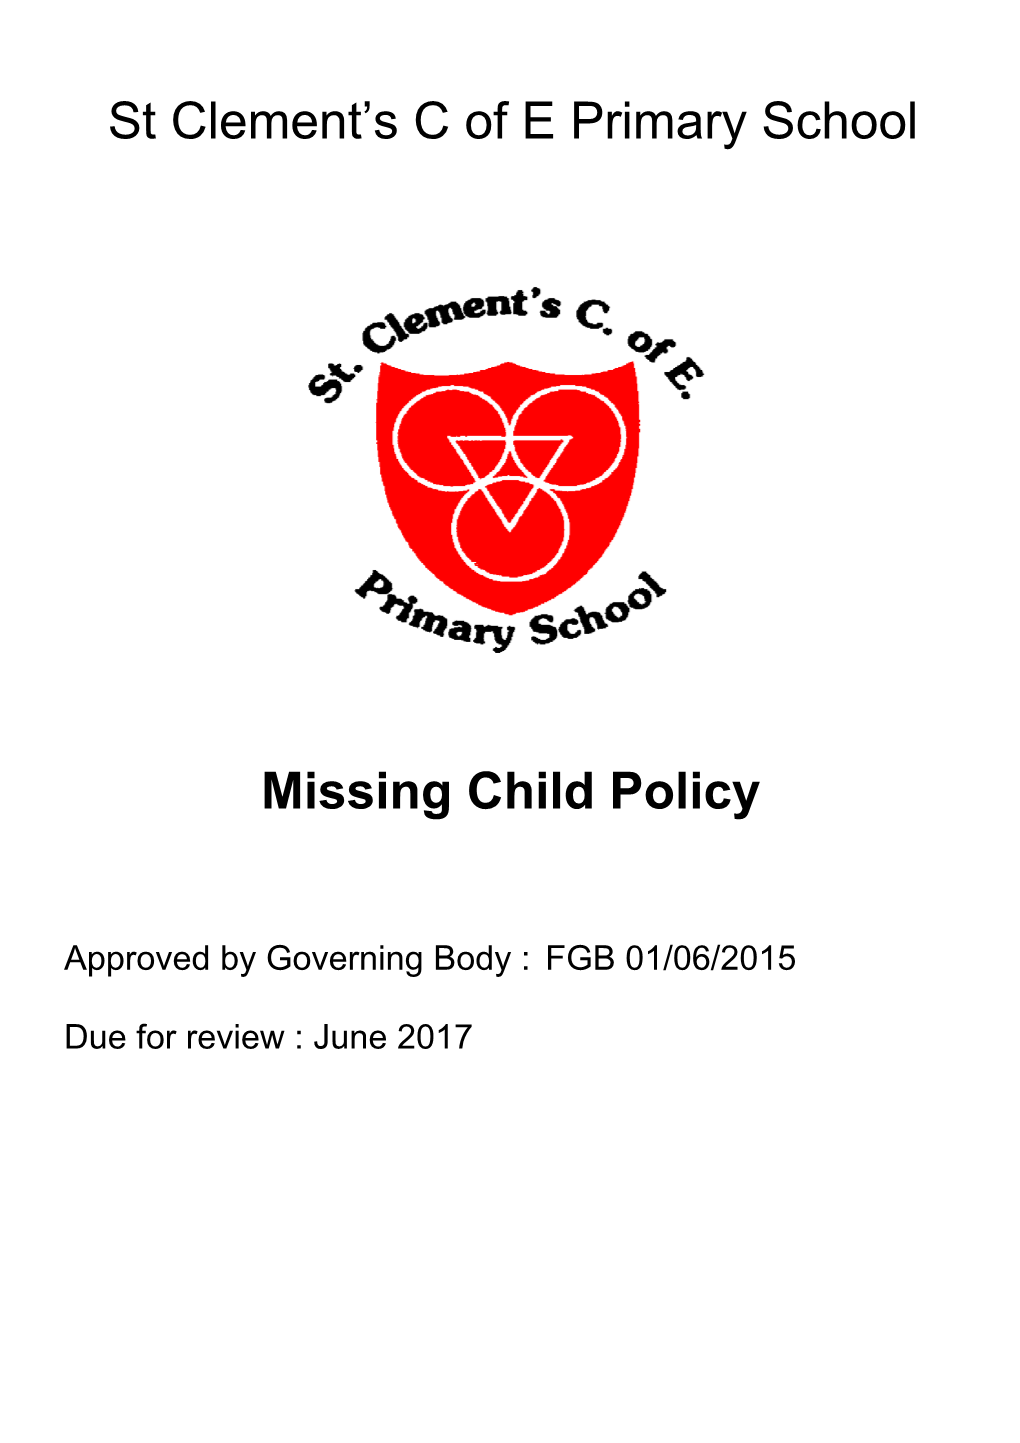 Missing Child Policy